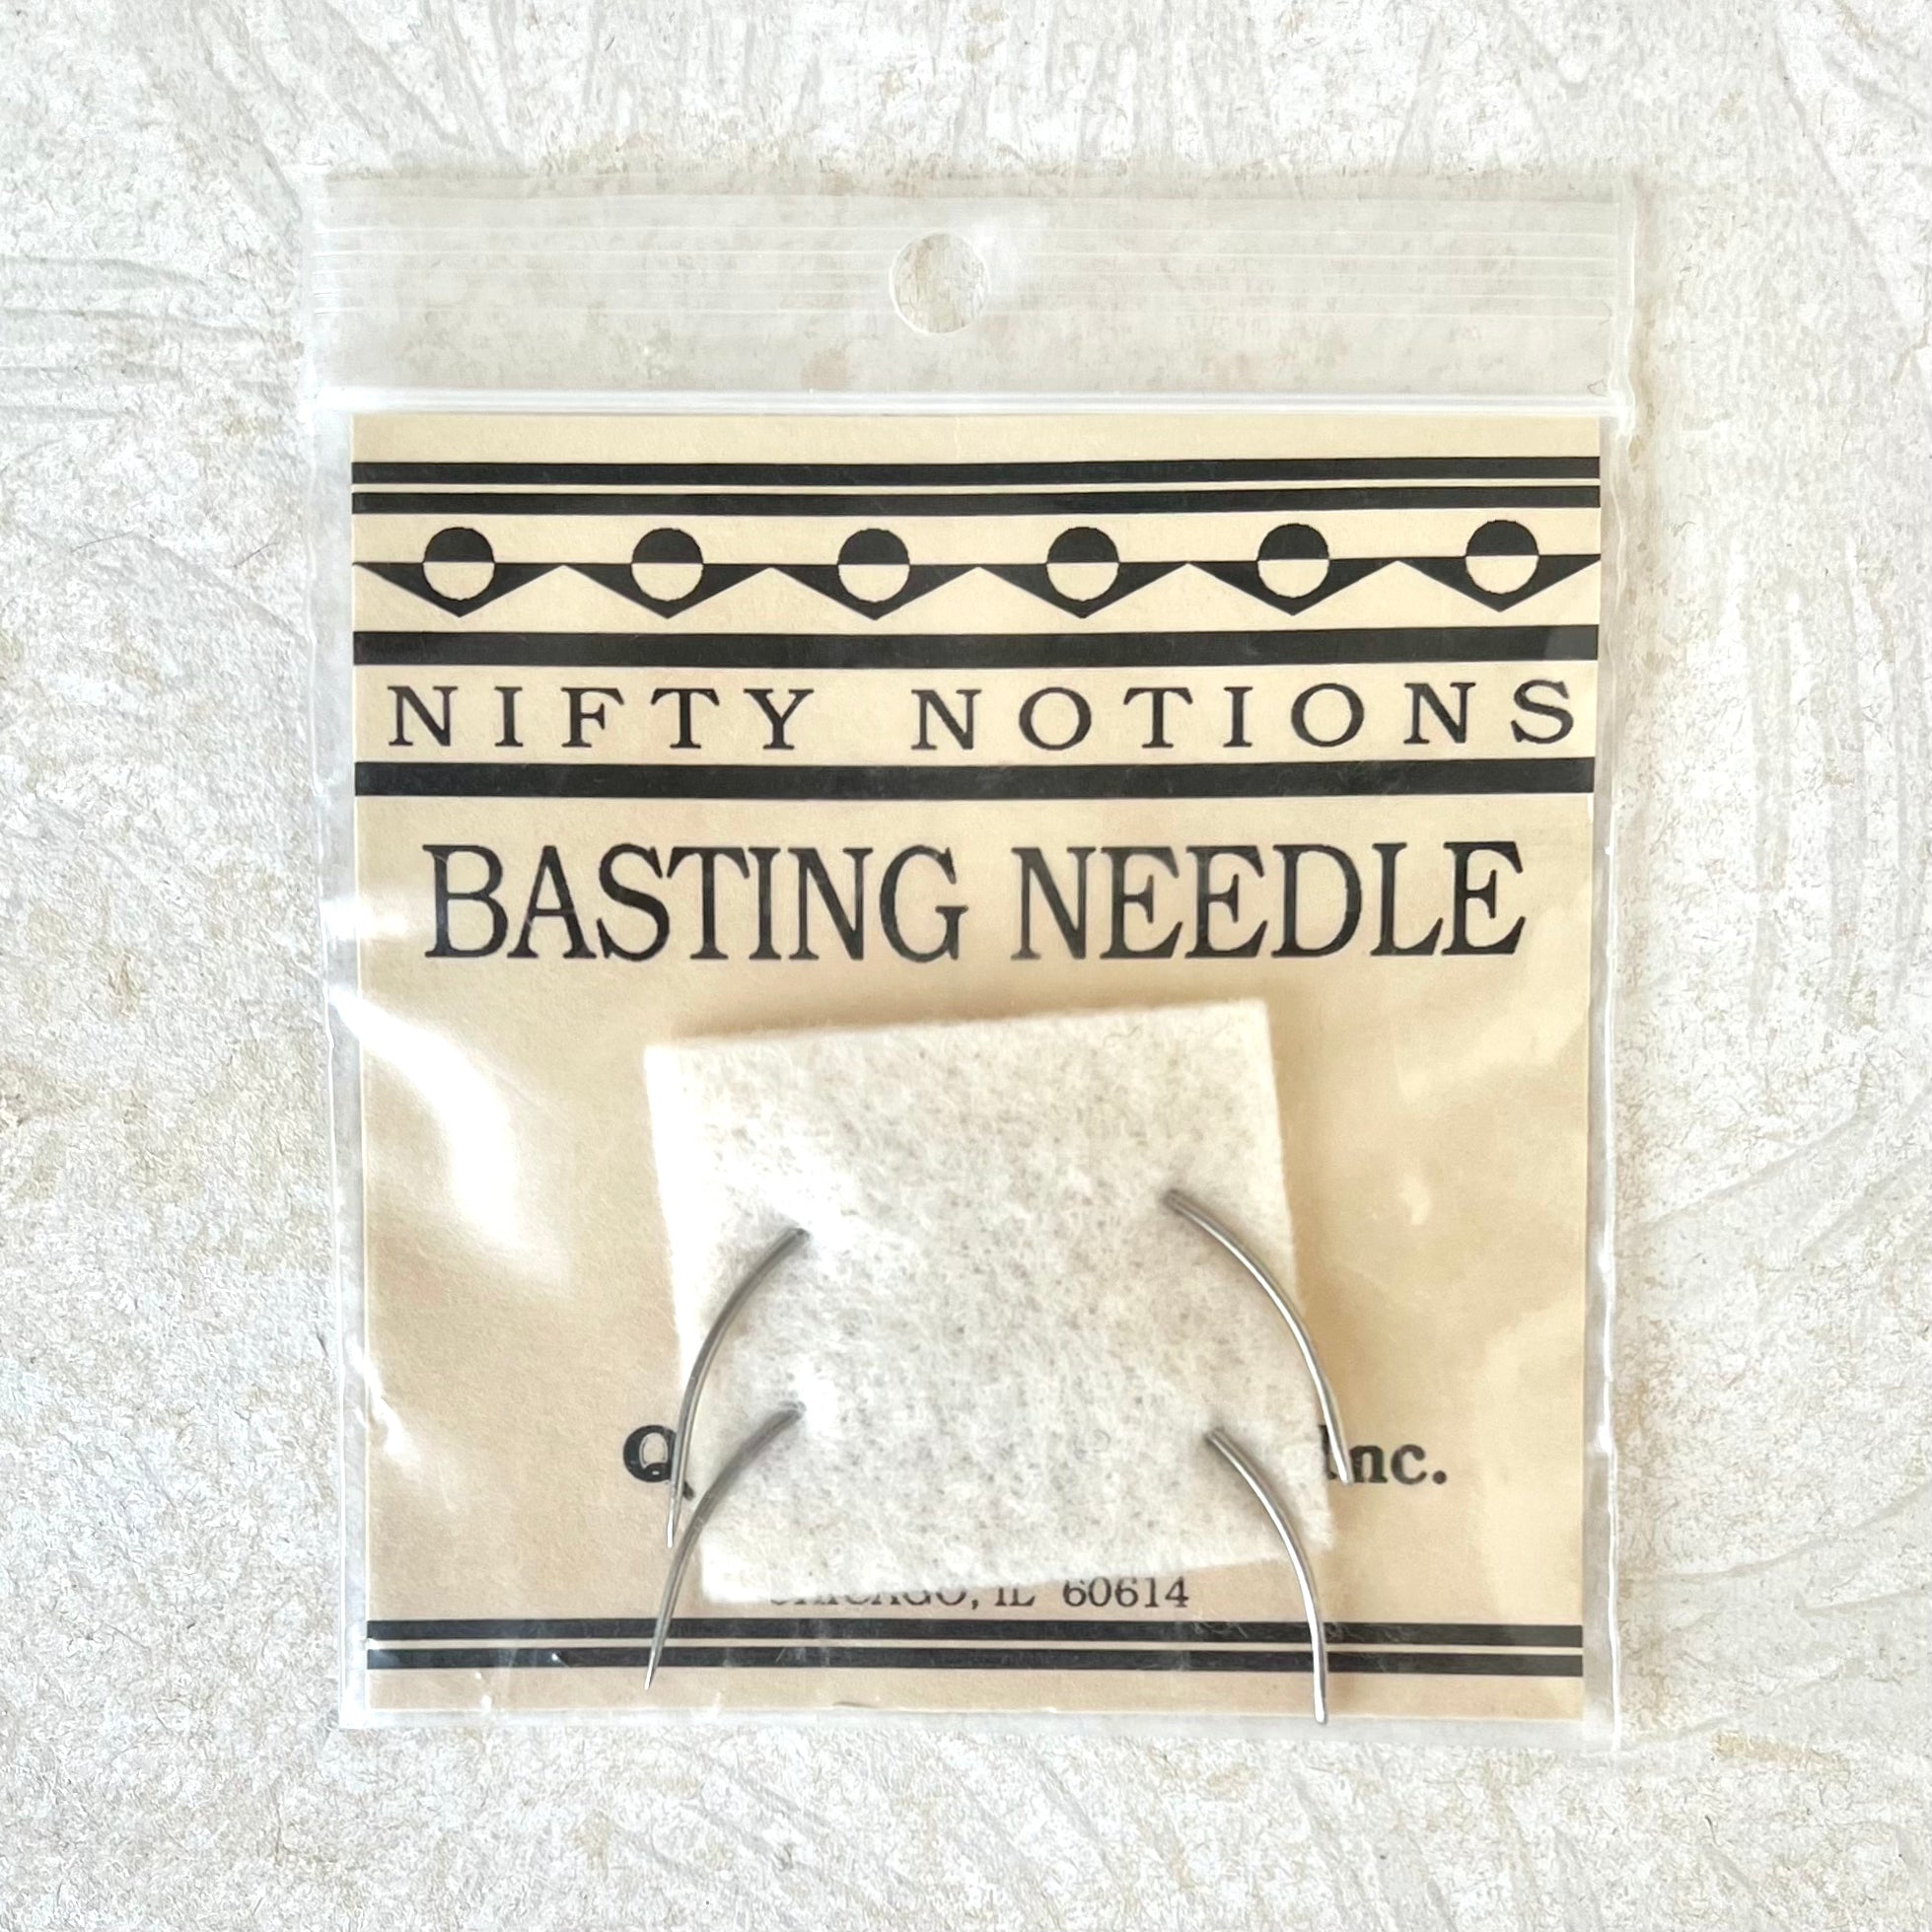 3 Curved Hand Sewing Needle - Bond Products Inc